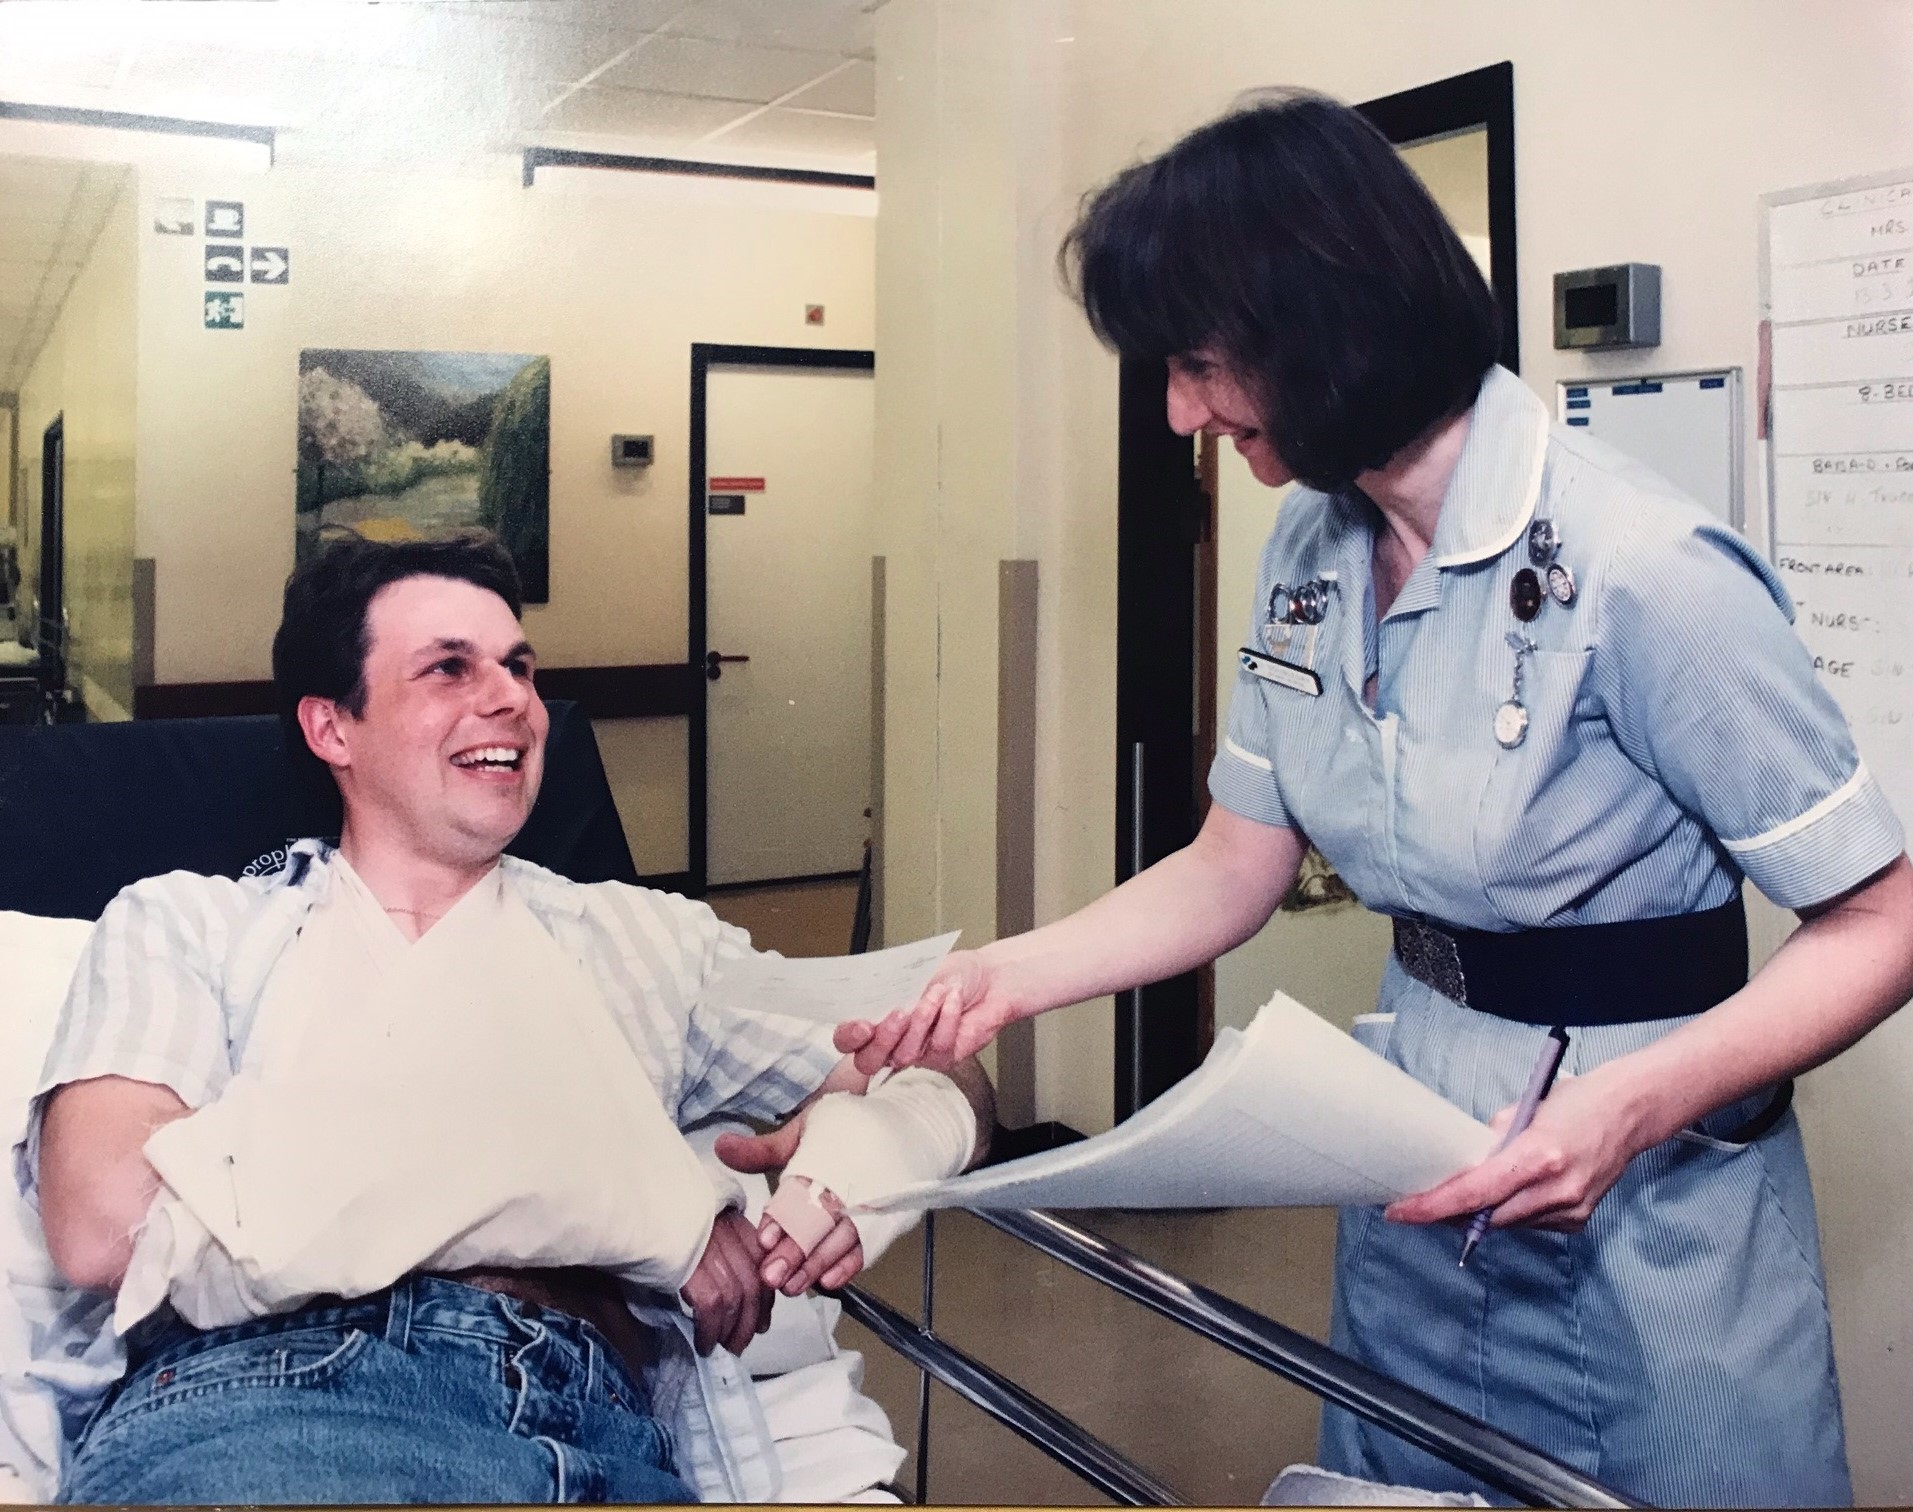 Treatment - nurse Julia Doubleday helped patient Chris Titchmarsh as he was discharged in March 1995